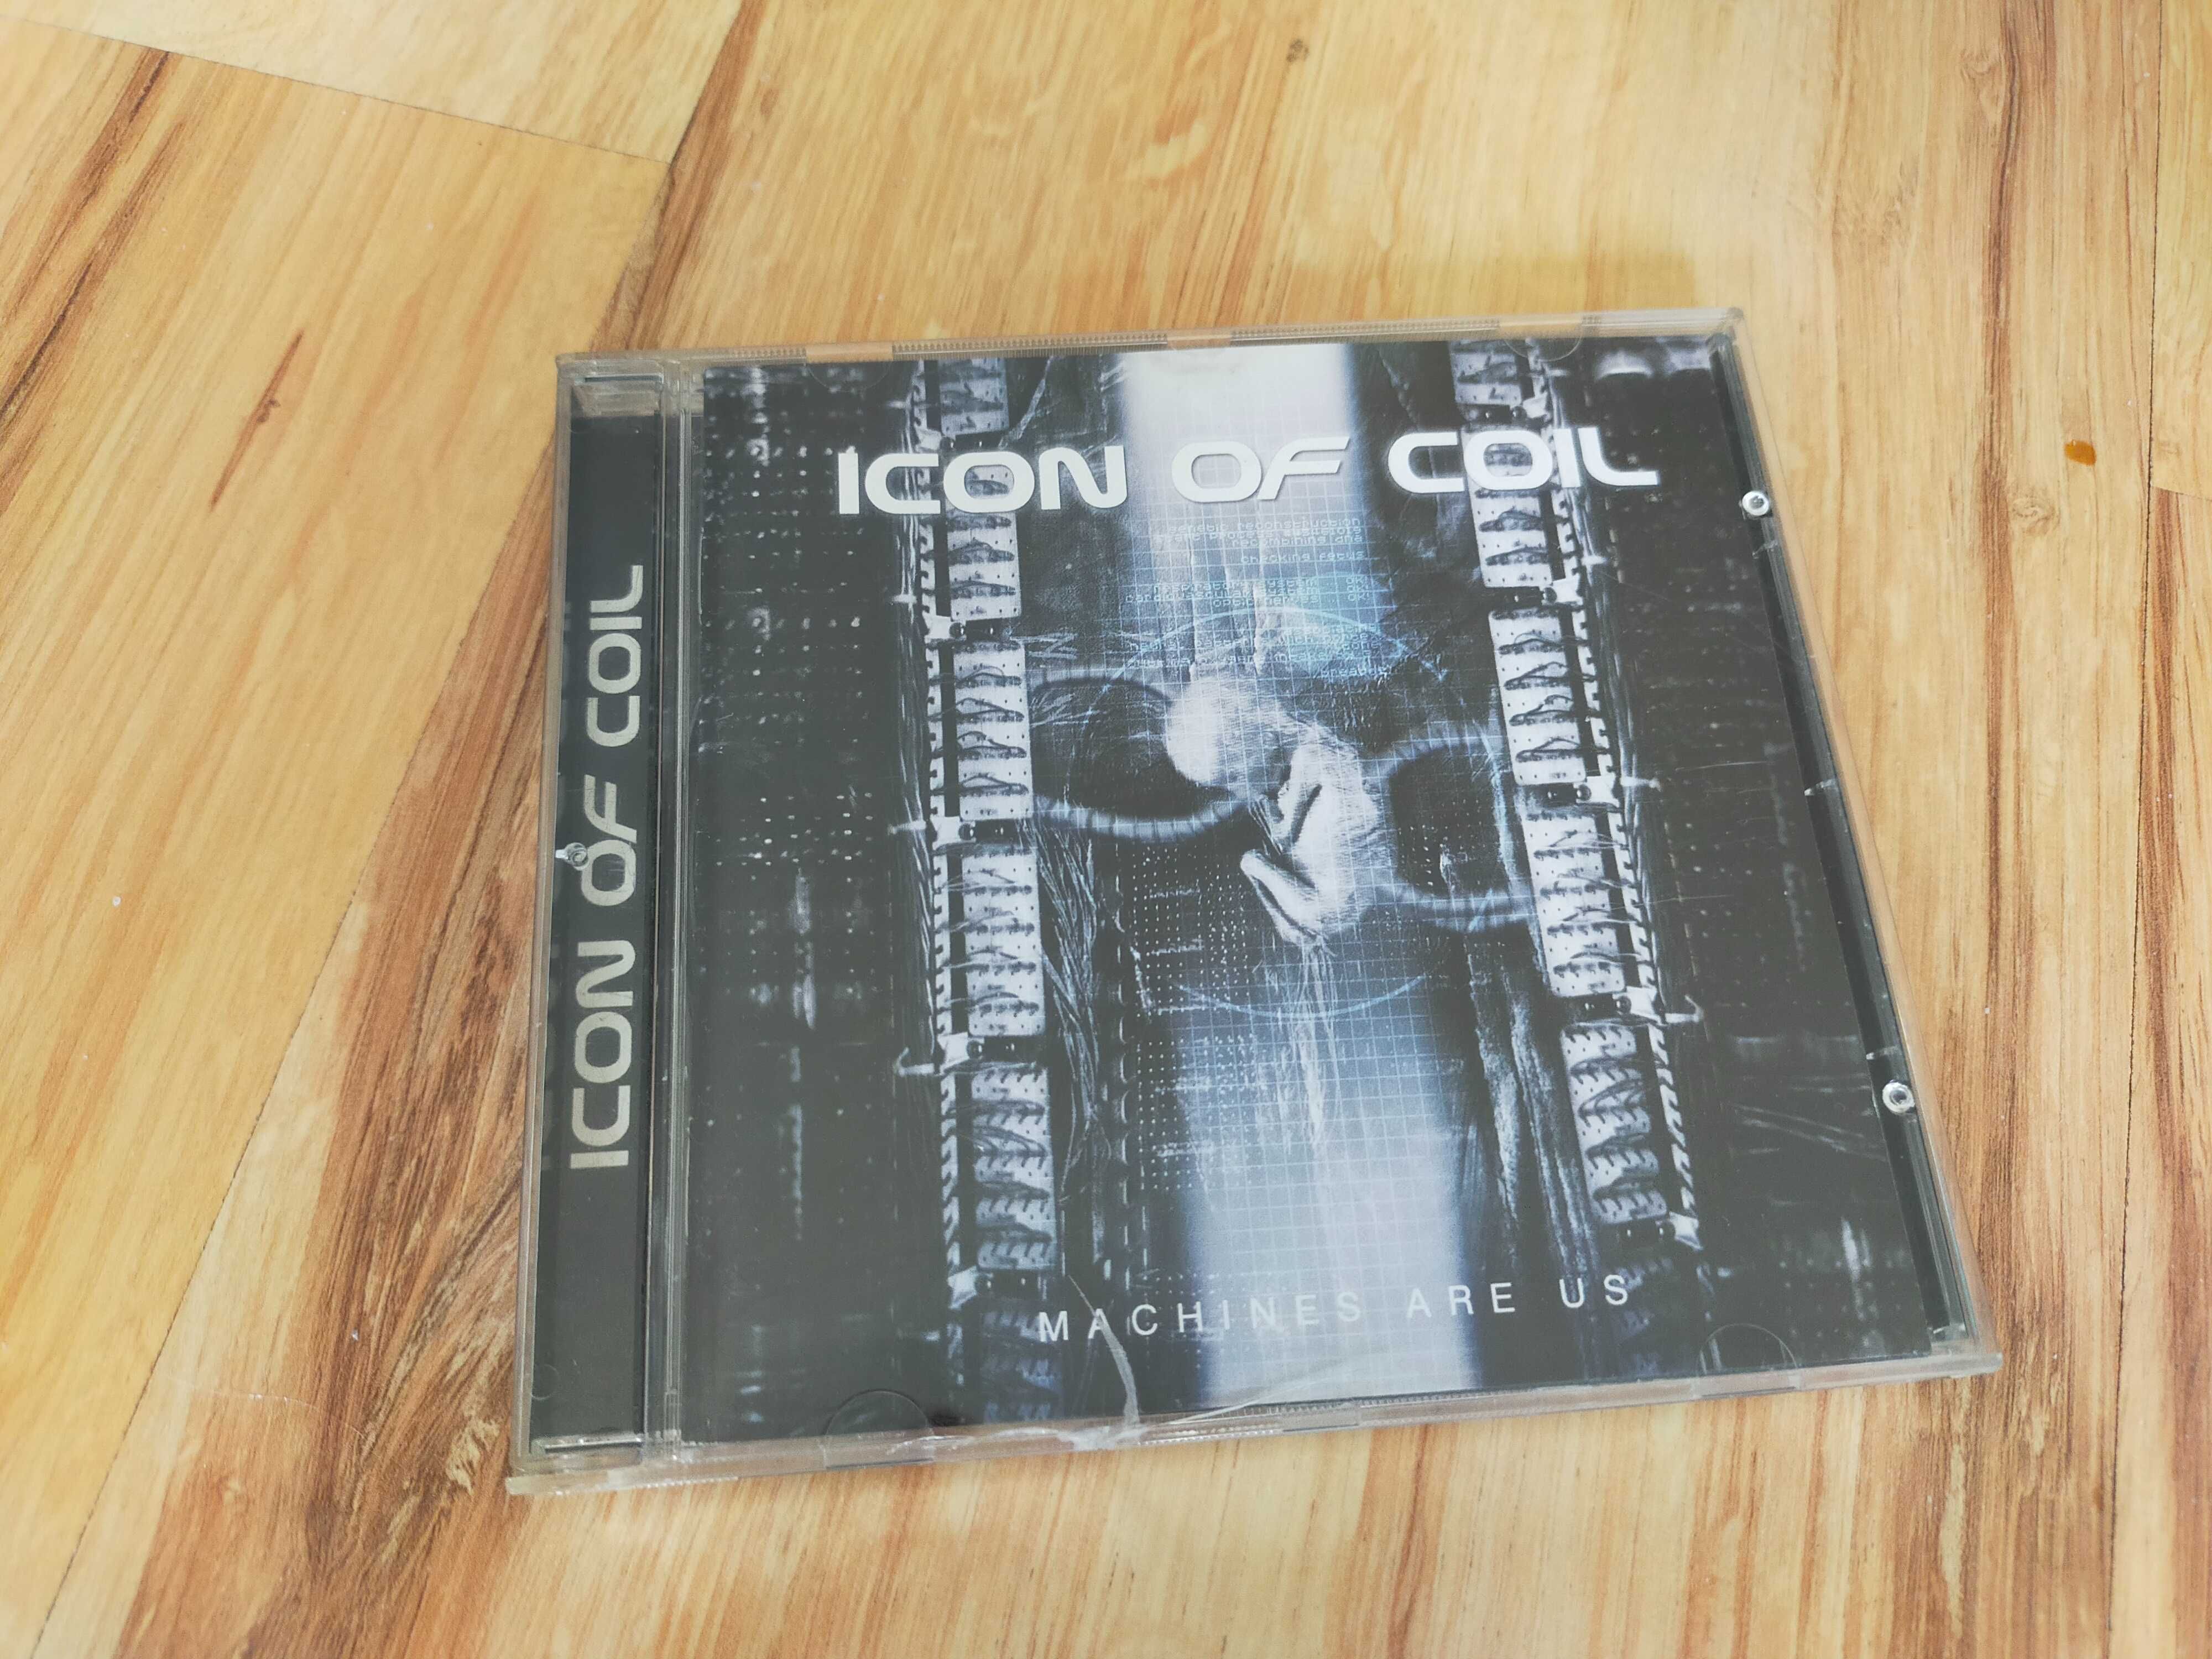 ICON OF COIL - "Machine Are Us" CD Jak nowa  Wyd. USA